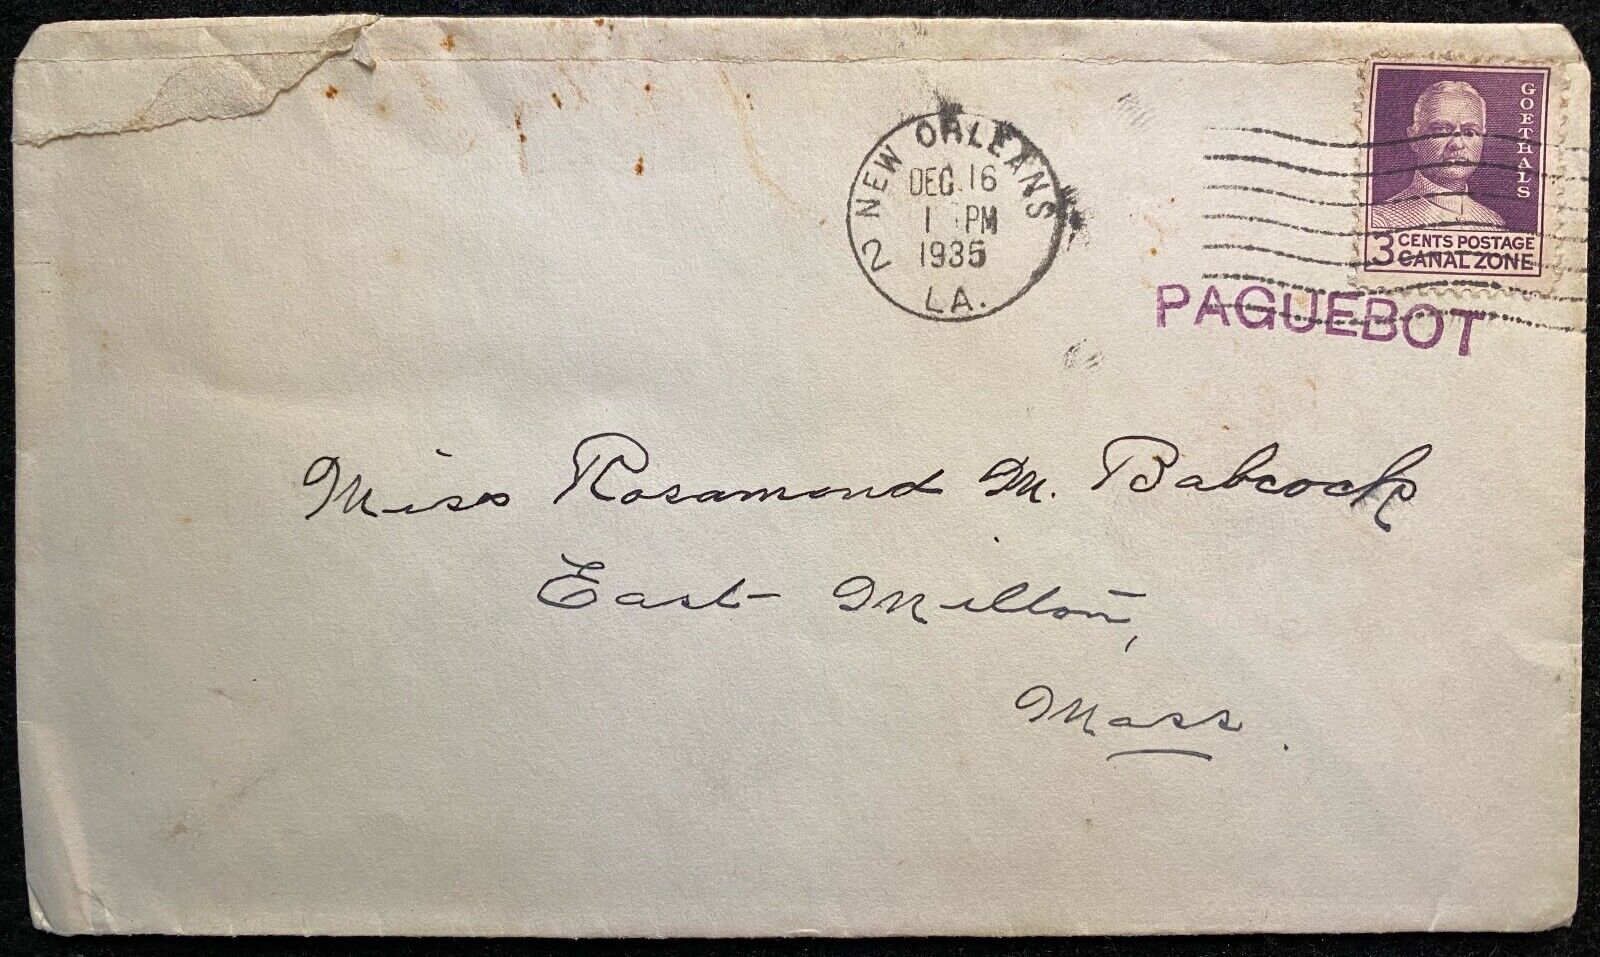 1935 **S.S. AMAPALA** NEW ORLEANS, LA. COVER+SCOTT 117 (CANAL ZONE) STAMP SANK